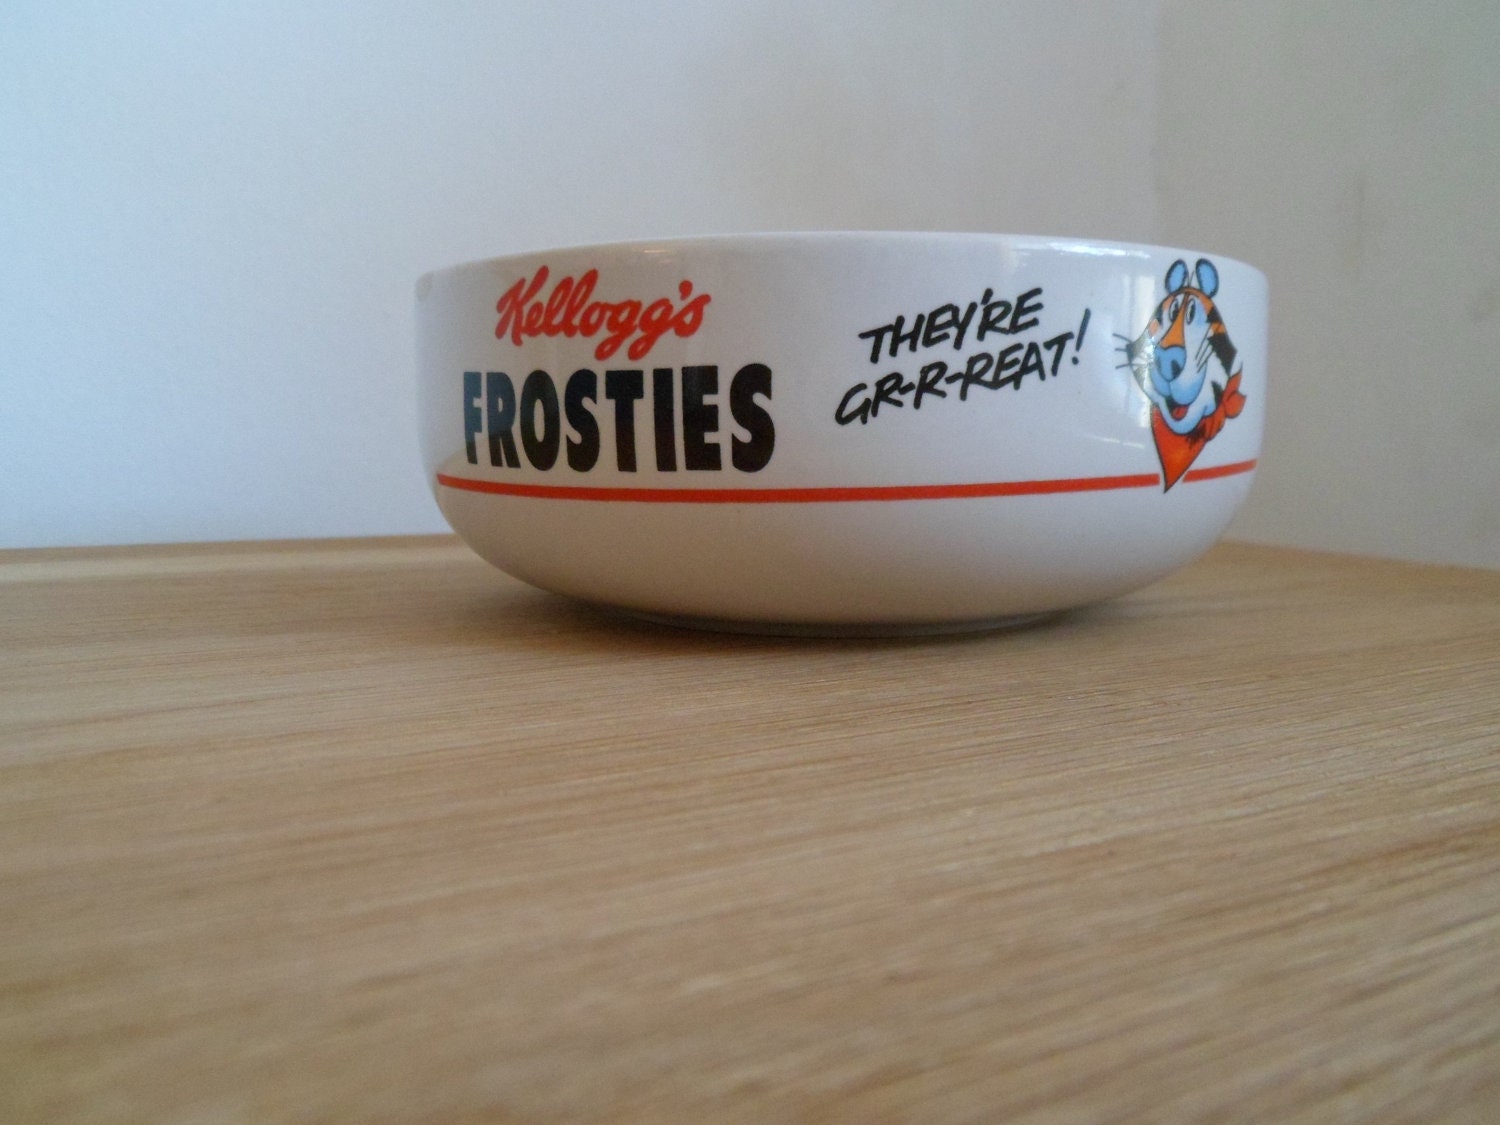 Vintage 80's Kellogg's Frosties Bowl by oohluckyhen on Etsy